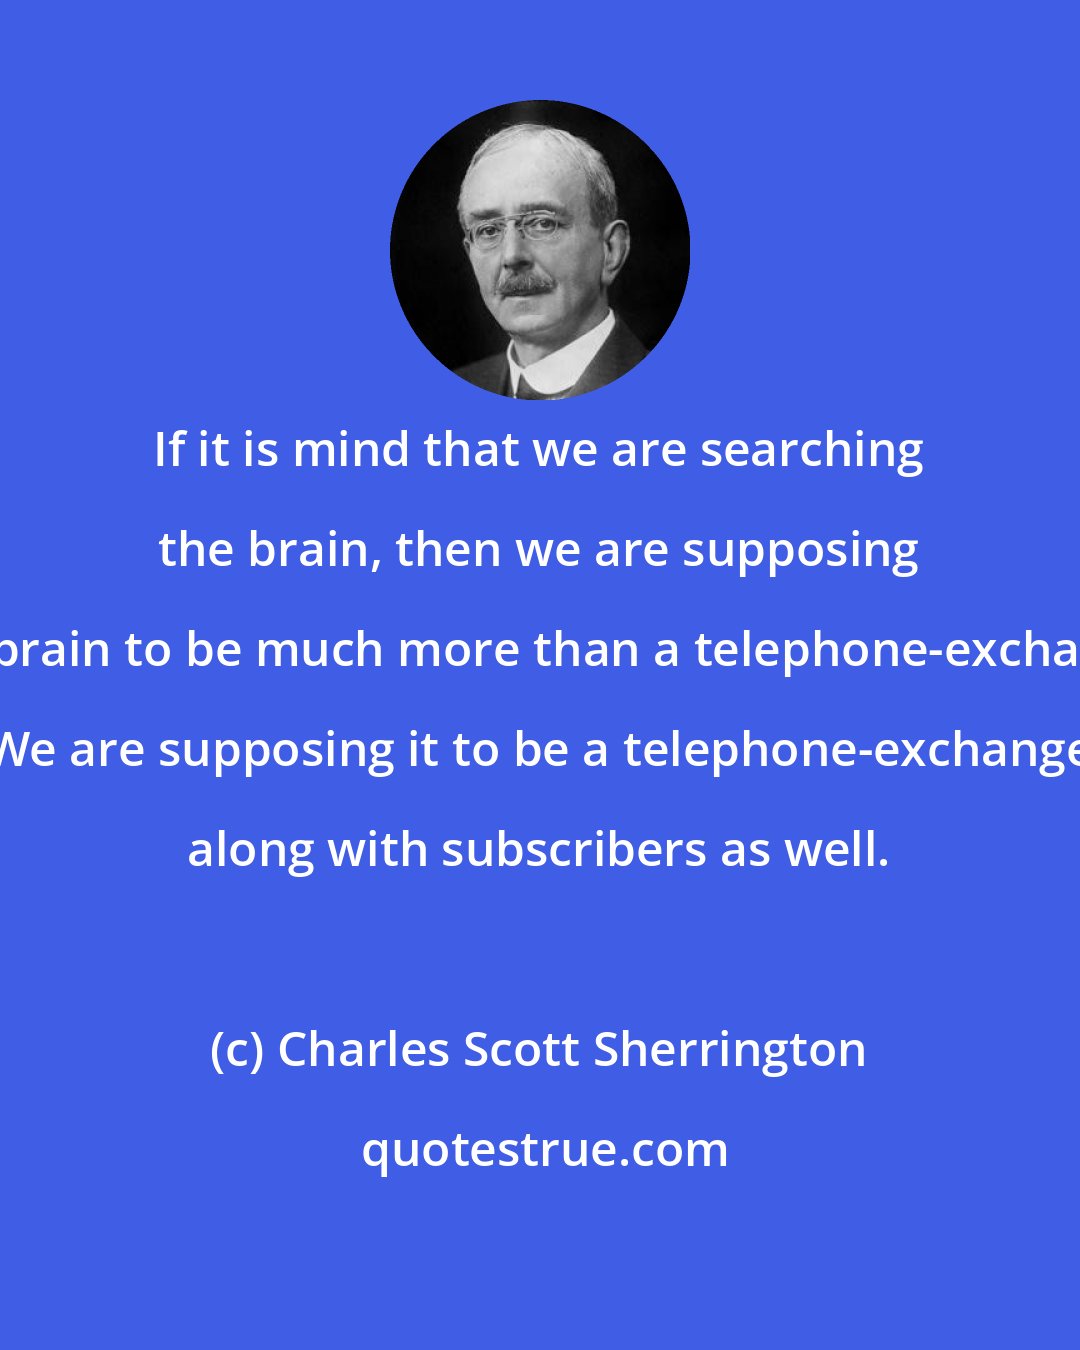 Charles Scott Sherrington: If it is mind that we are searching the brain, then we are supposing the brain to be much more than a telephone-exchange. We are supposing it to be a telephone-exchange along with subscribers as well.